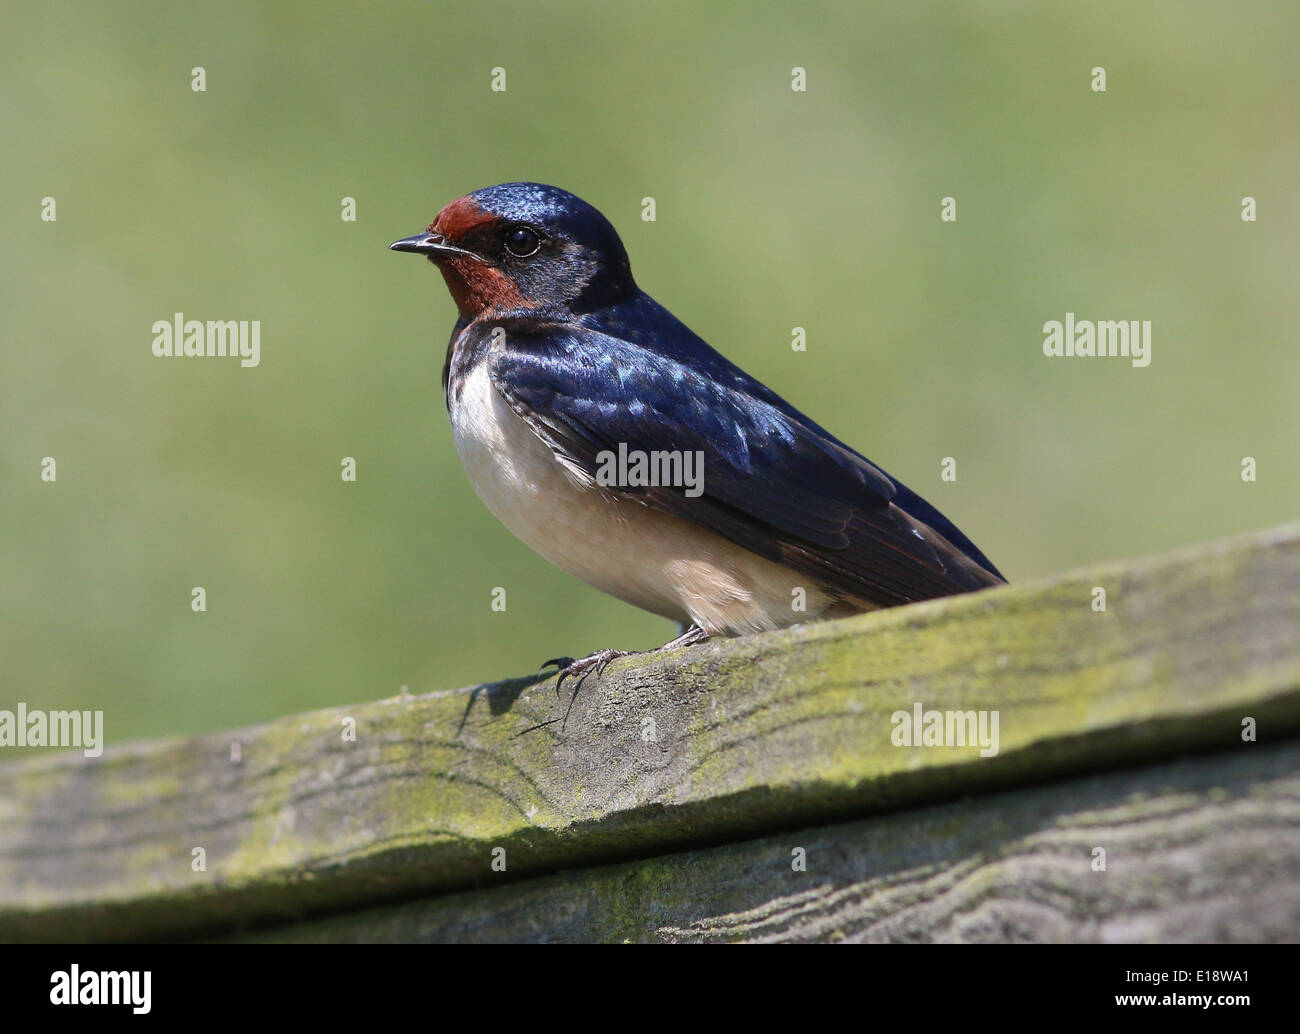 Detailed close up of a Barn swallow (Hirundo rustica) posing on a fence Stock Photo